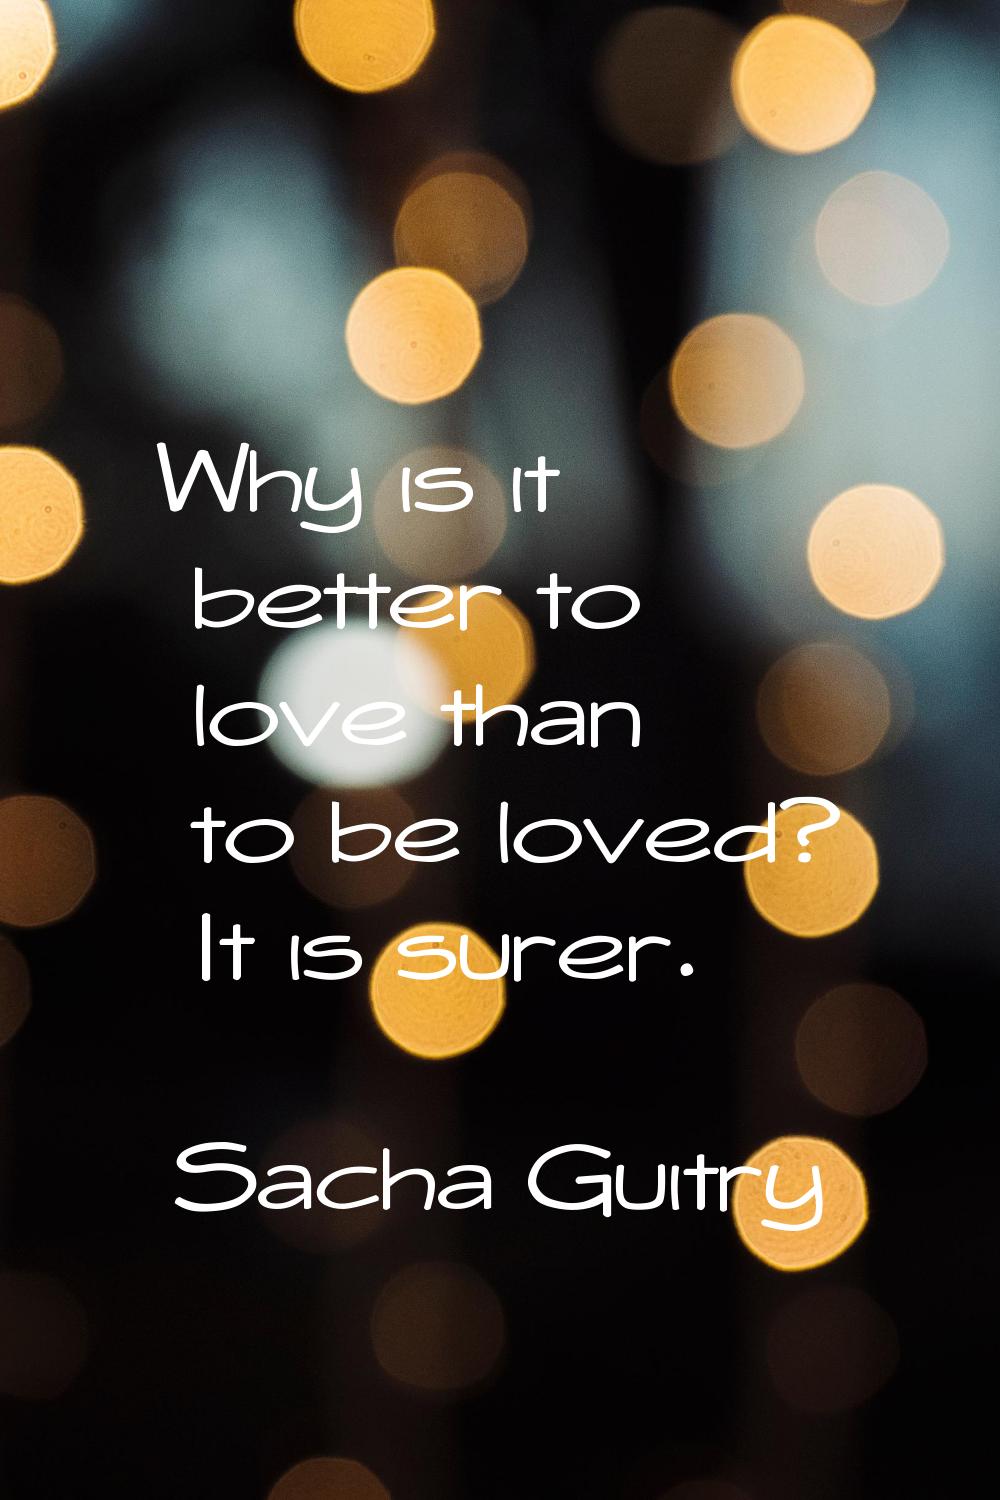 Why is it better to love than to be loved? It is surer.